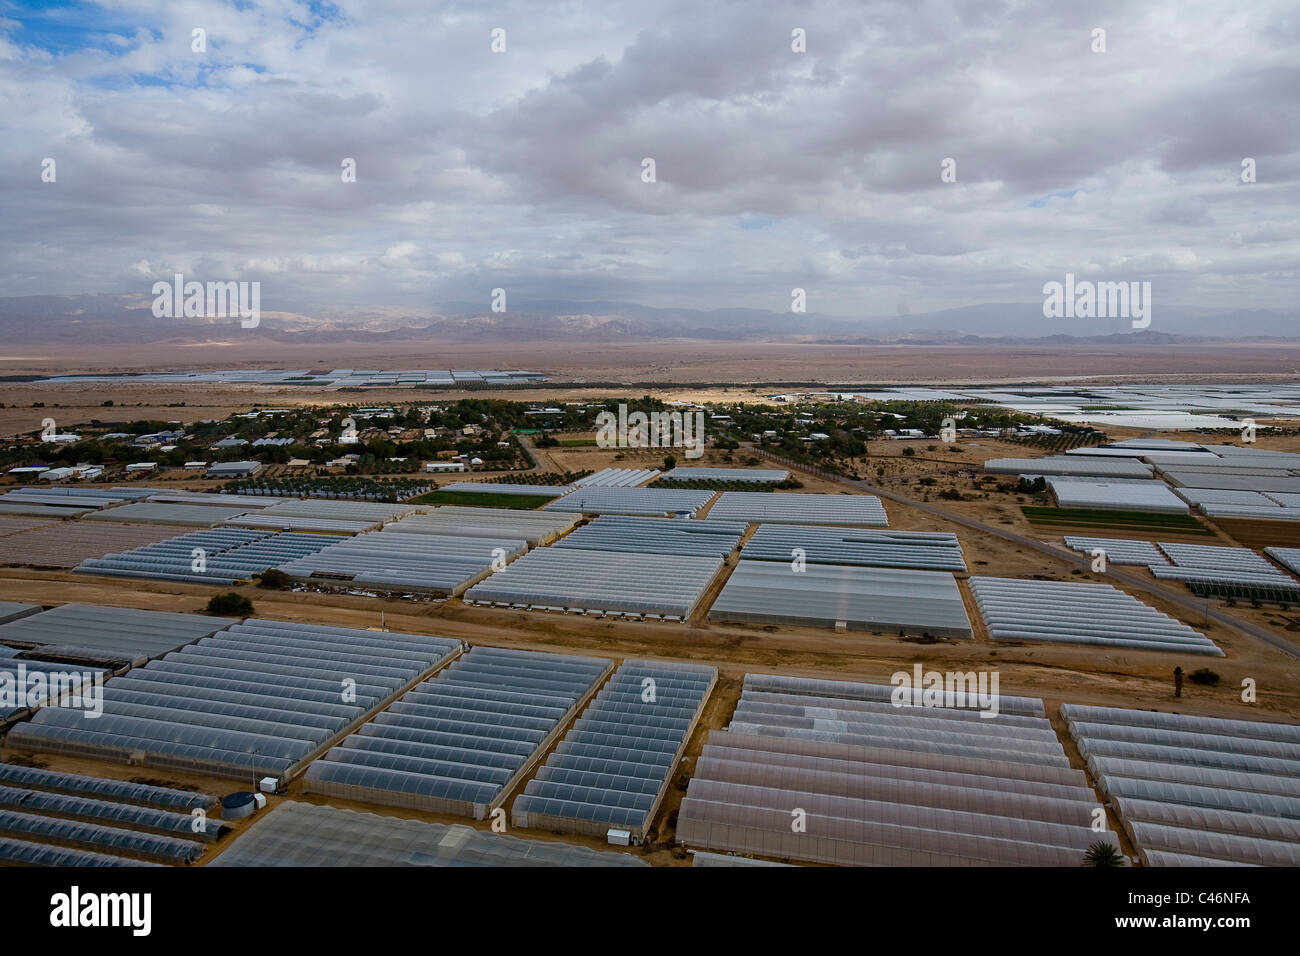 Aerial photograph of the greenhouses of Paran in the Arava Stock Photo